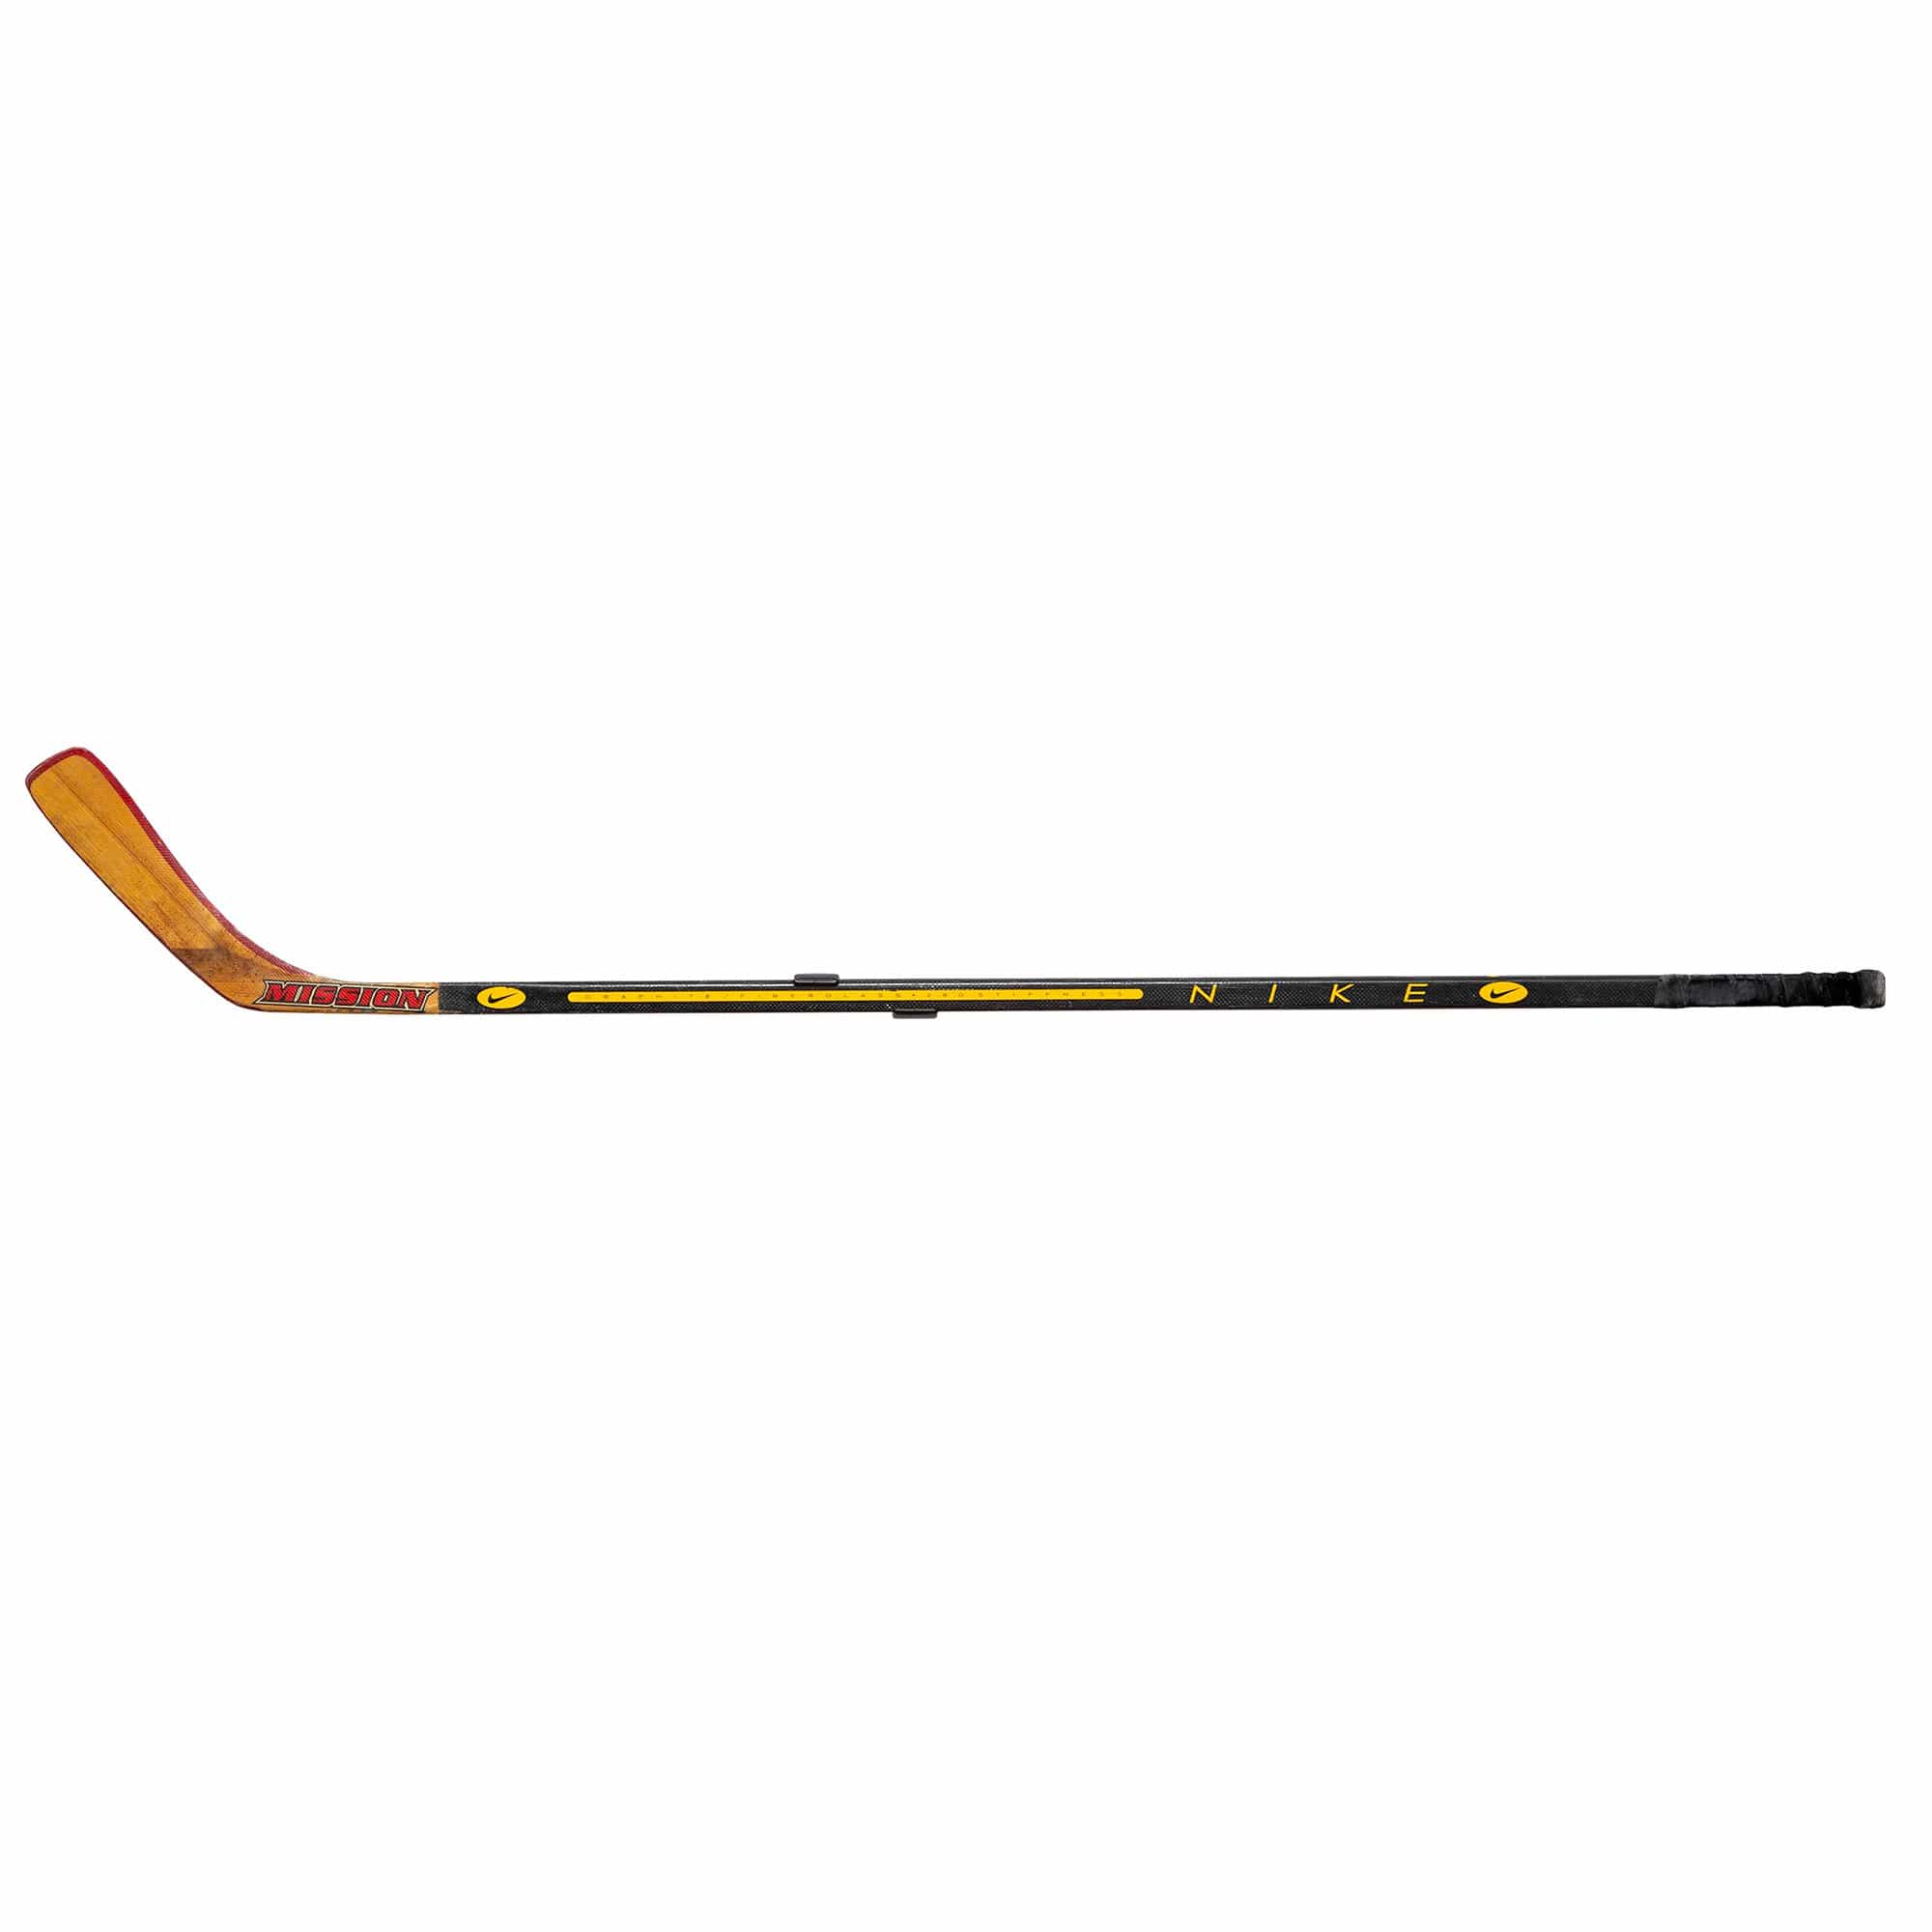 Bauer hockey stick shown mounted in a HIDEit Horizontal Hockey Stick Mount. Designed for adult hockey sticks and youth hockey sticks.